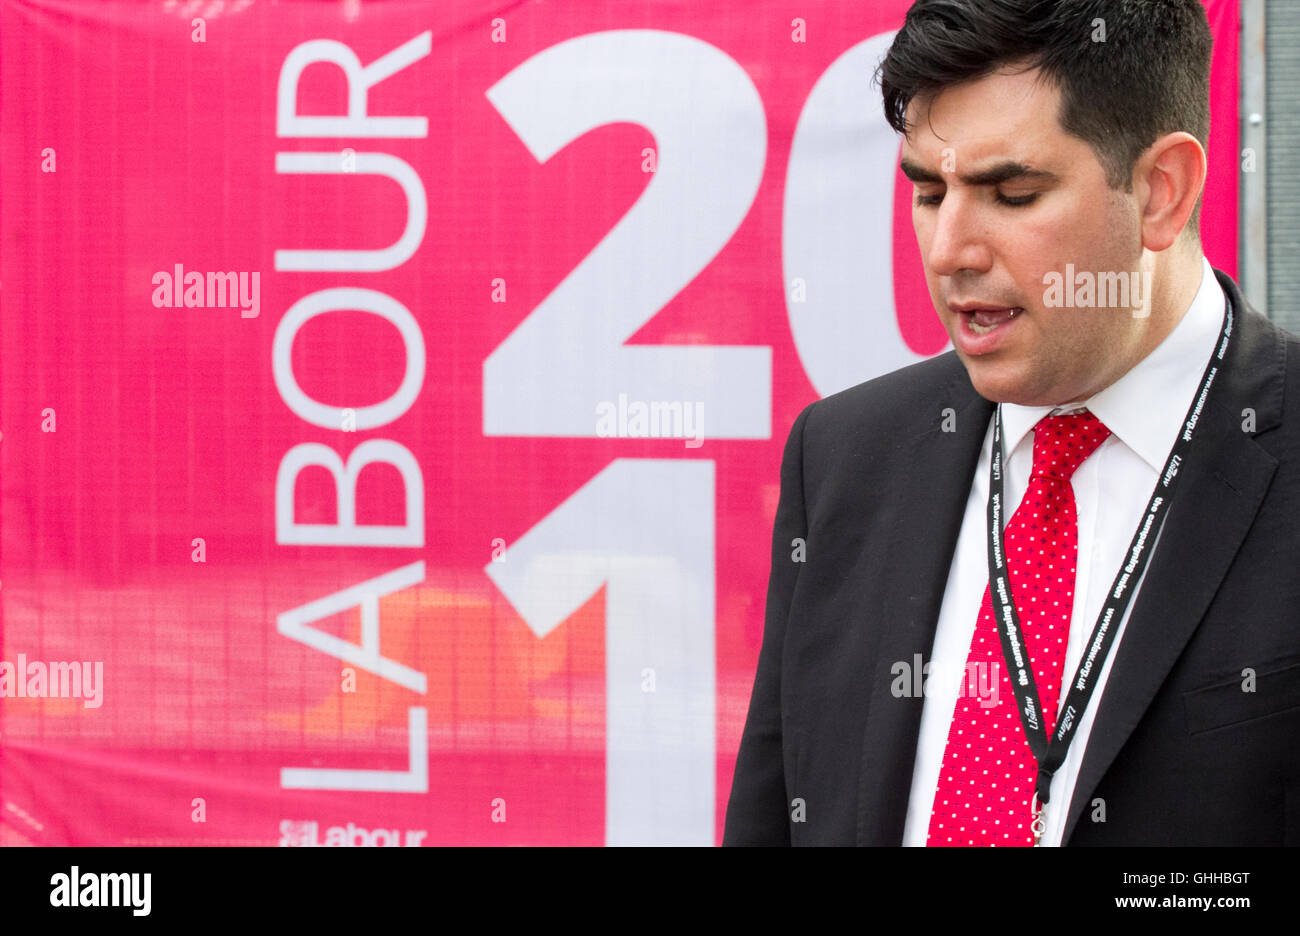 Liverpool, UK . 28th September, 2016. Final Day Labour Party Conference:   Richard Burgon MP, talks to loyal members & supporters after he leaves the final day of the Labour Party conference.  Richard Burgon is a British Labour Party politician who is the Member of Parliament for Leeds East. He is also the Shadow Secretary of State for Justice and Shadow Lord Chancellor.  Credit:  Cernan Elias/Alamy Live News Stock Photo